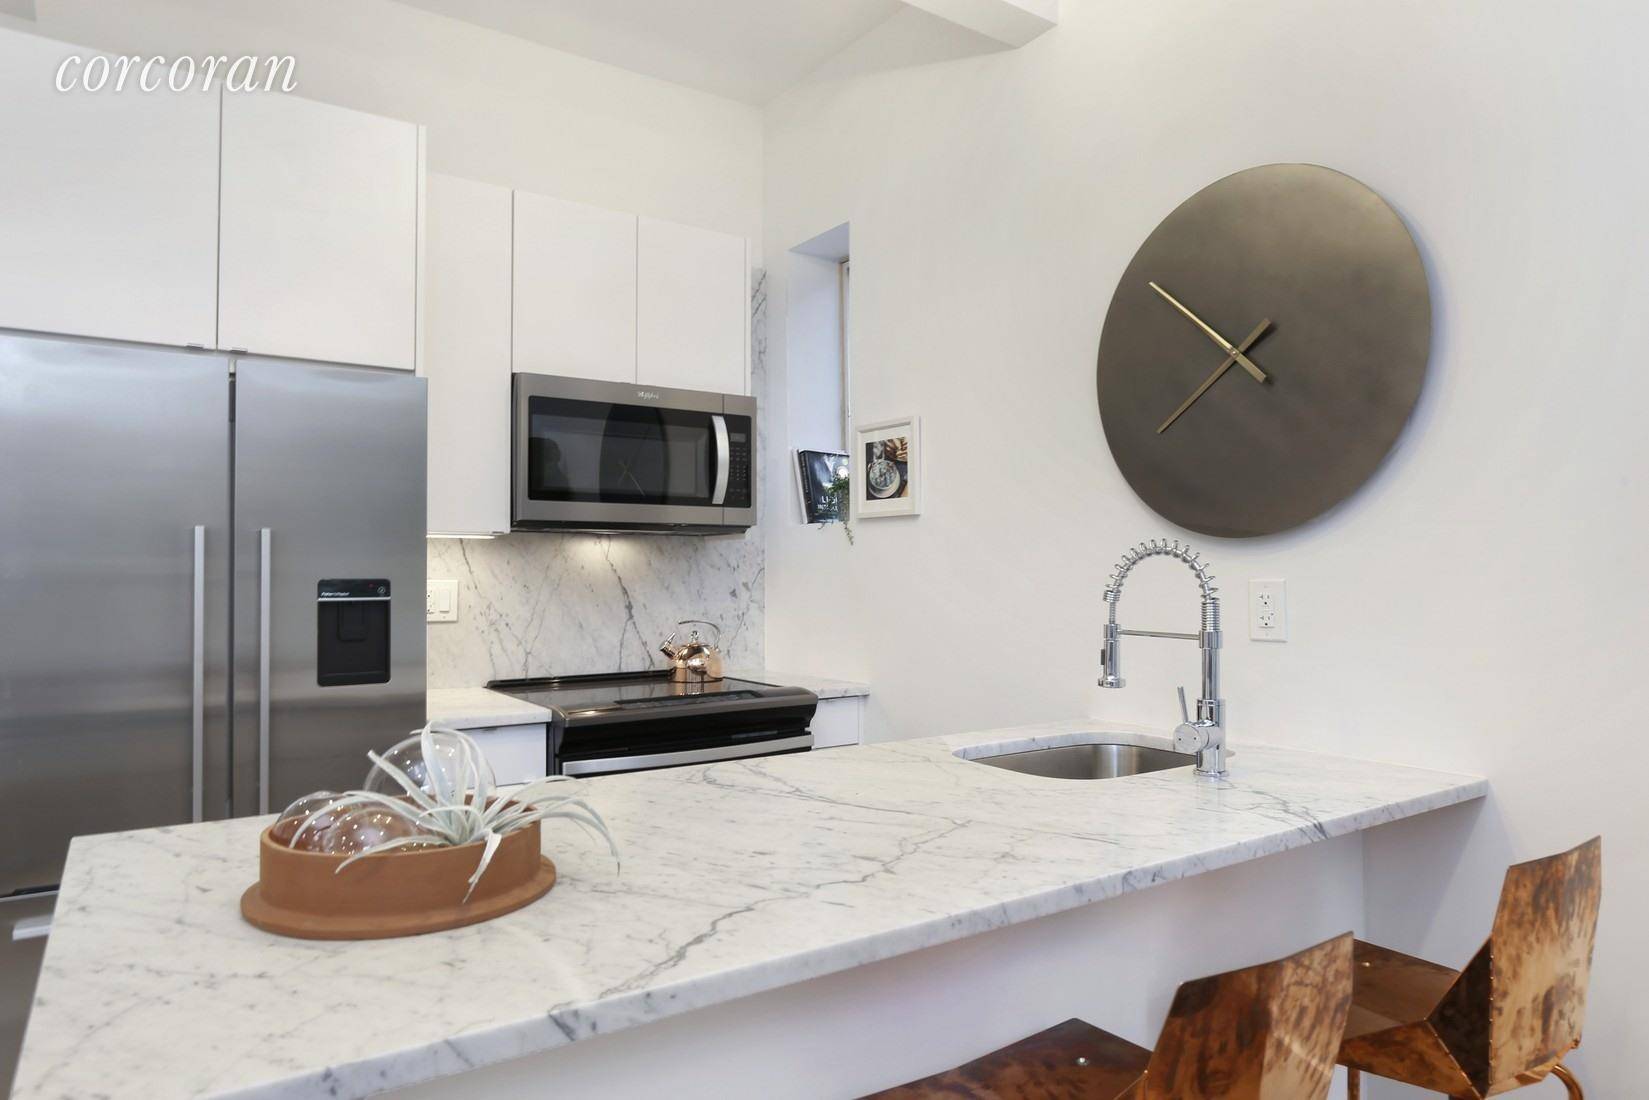 Finally an opportunity to own a piece of wonderful Carroll Gardens in a light filled and all new condo in a converted 4 unit historic townhouse for a great price.